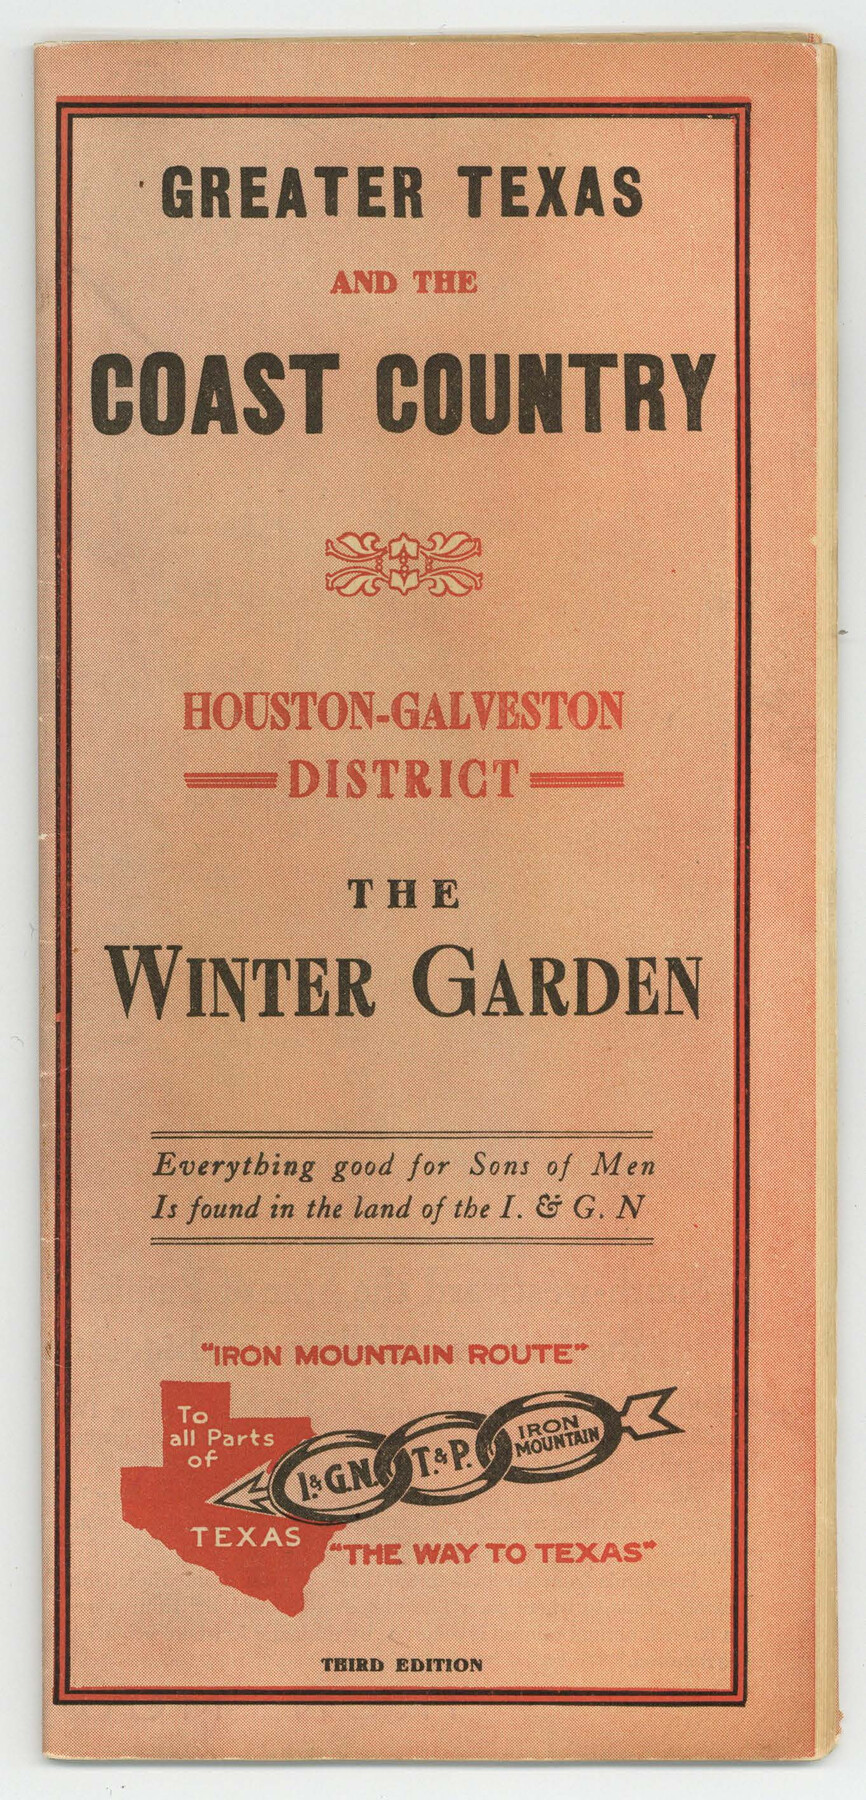 97057, Greater Texas and the Coast Country - The Winter Garden